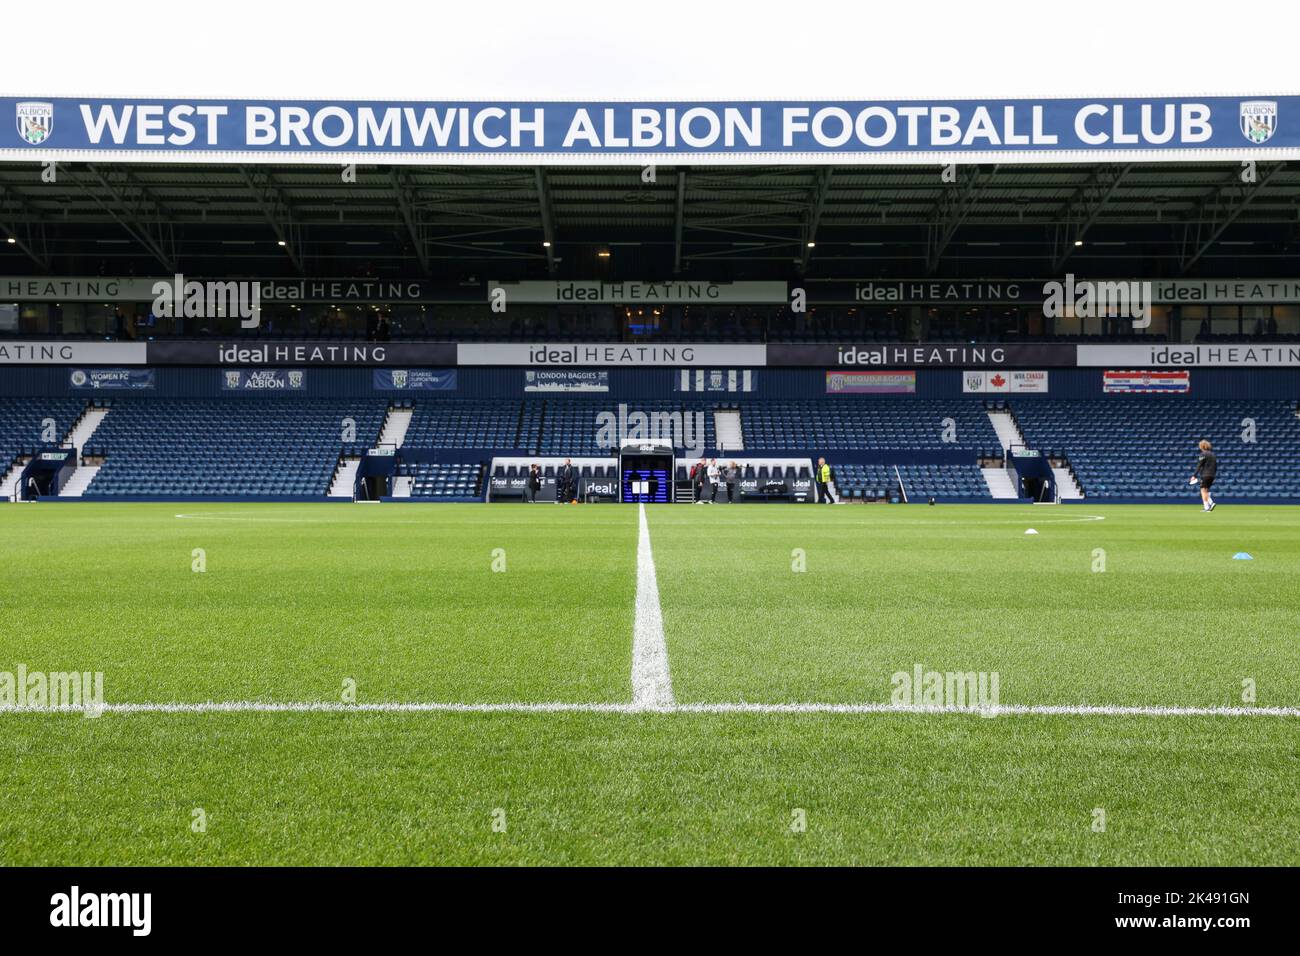 General view of the Hawthorns during the Sky Bet Championship match West Bromwich Albion vs Swansea City at The Hawthorns, West Bromwich, United Kingdom, 1st October 2022  (Photo by Simon Bissett/News Images) Stock Photo